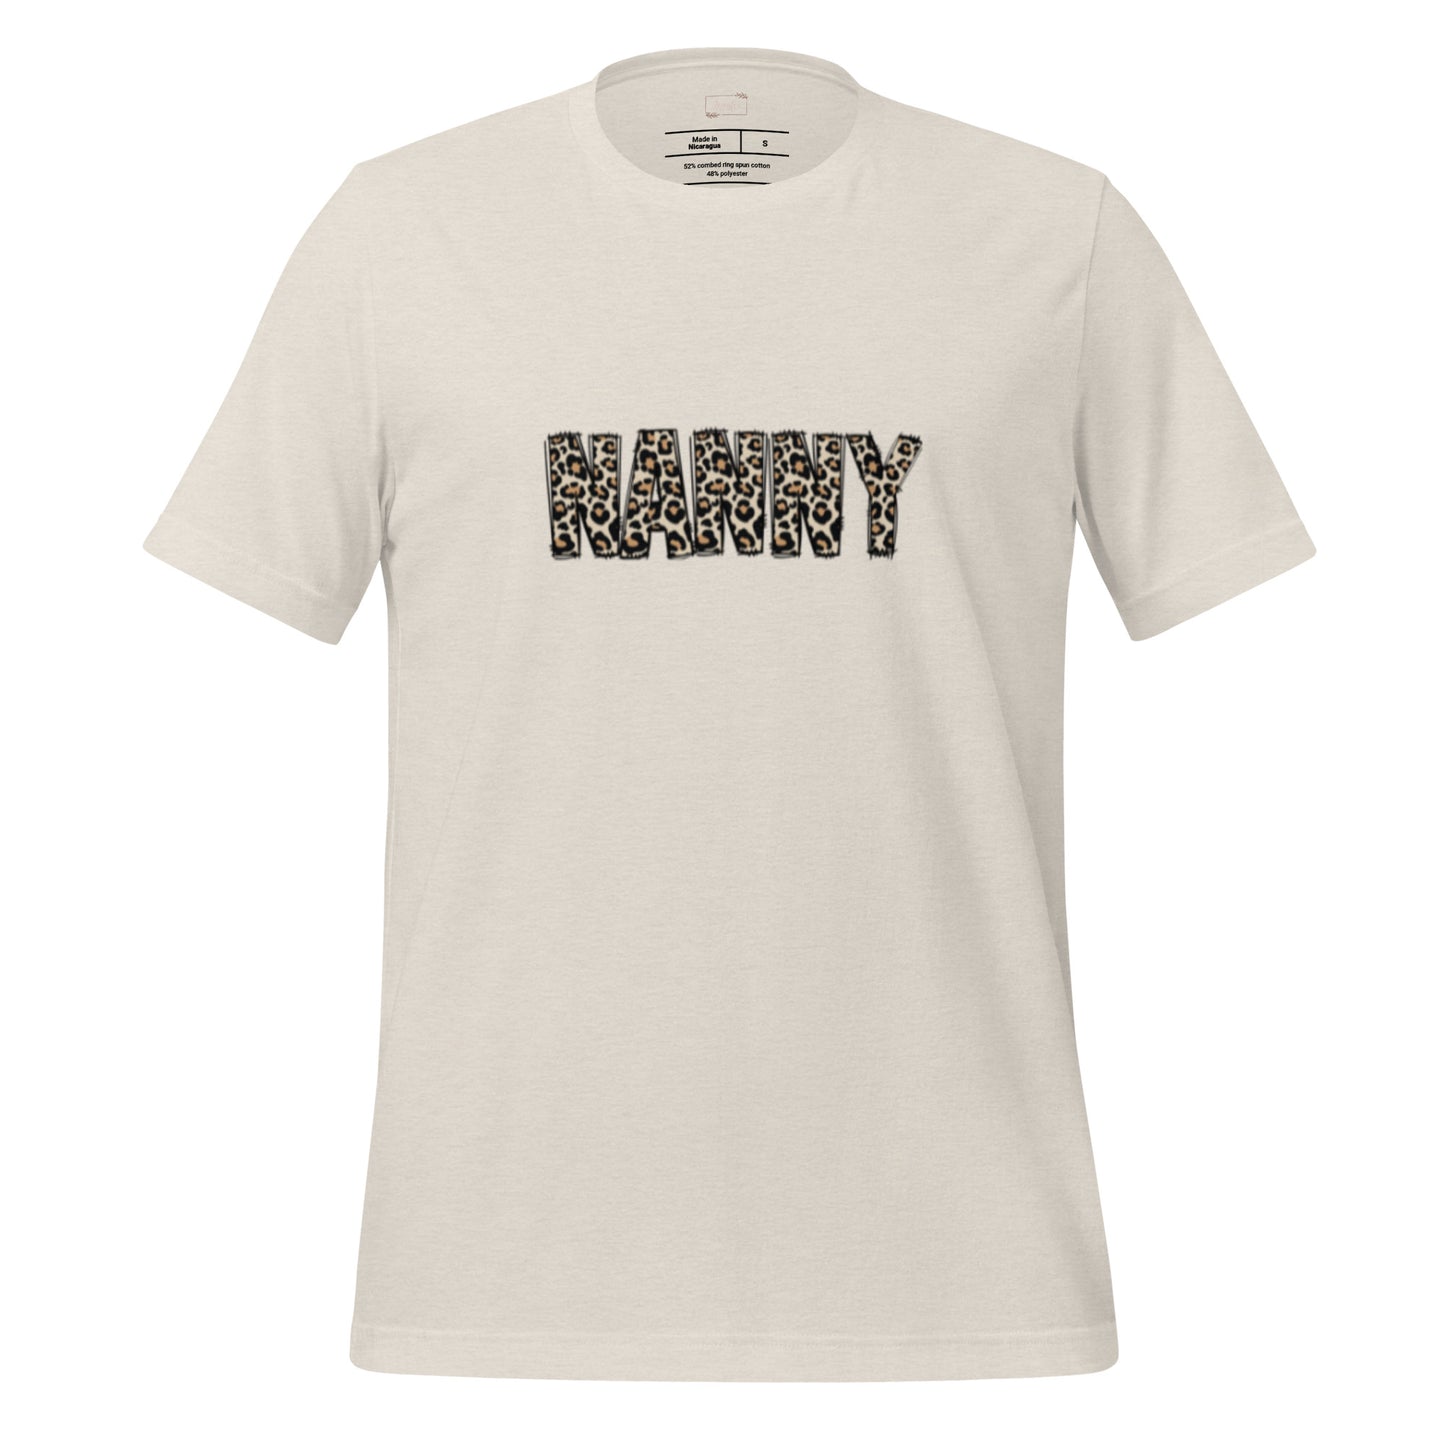 Nanny, Can Be Customized, Unisex t-shirt